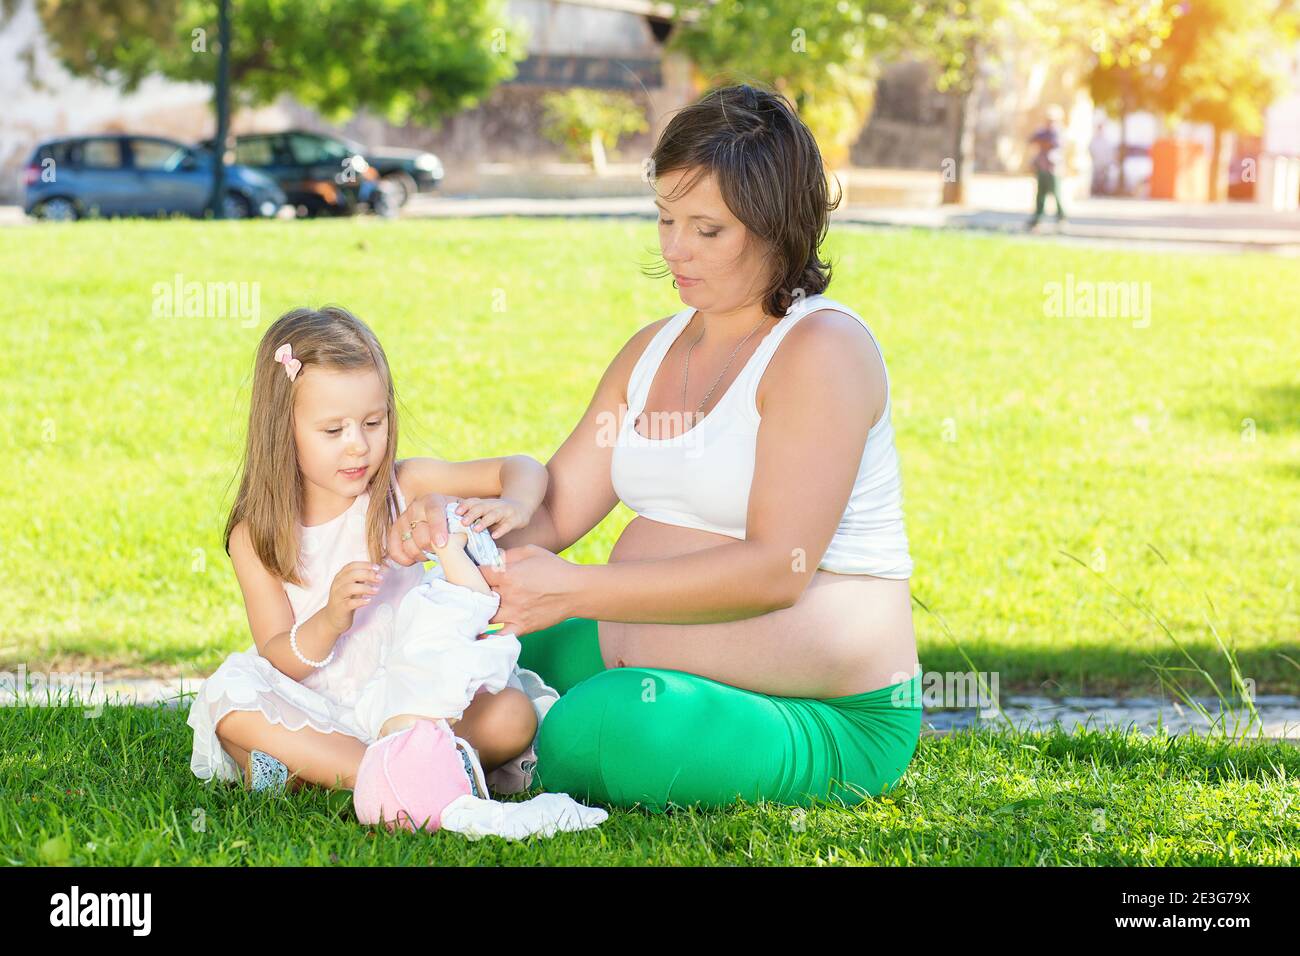 Kid girl withpregnant mom resting playing with a doll in park on green grass. Girls playing with toys. Both and wearing white clothing dresses. Picnic Stock Photo